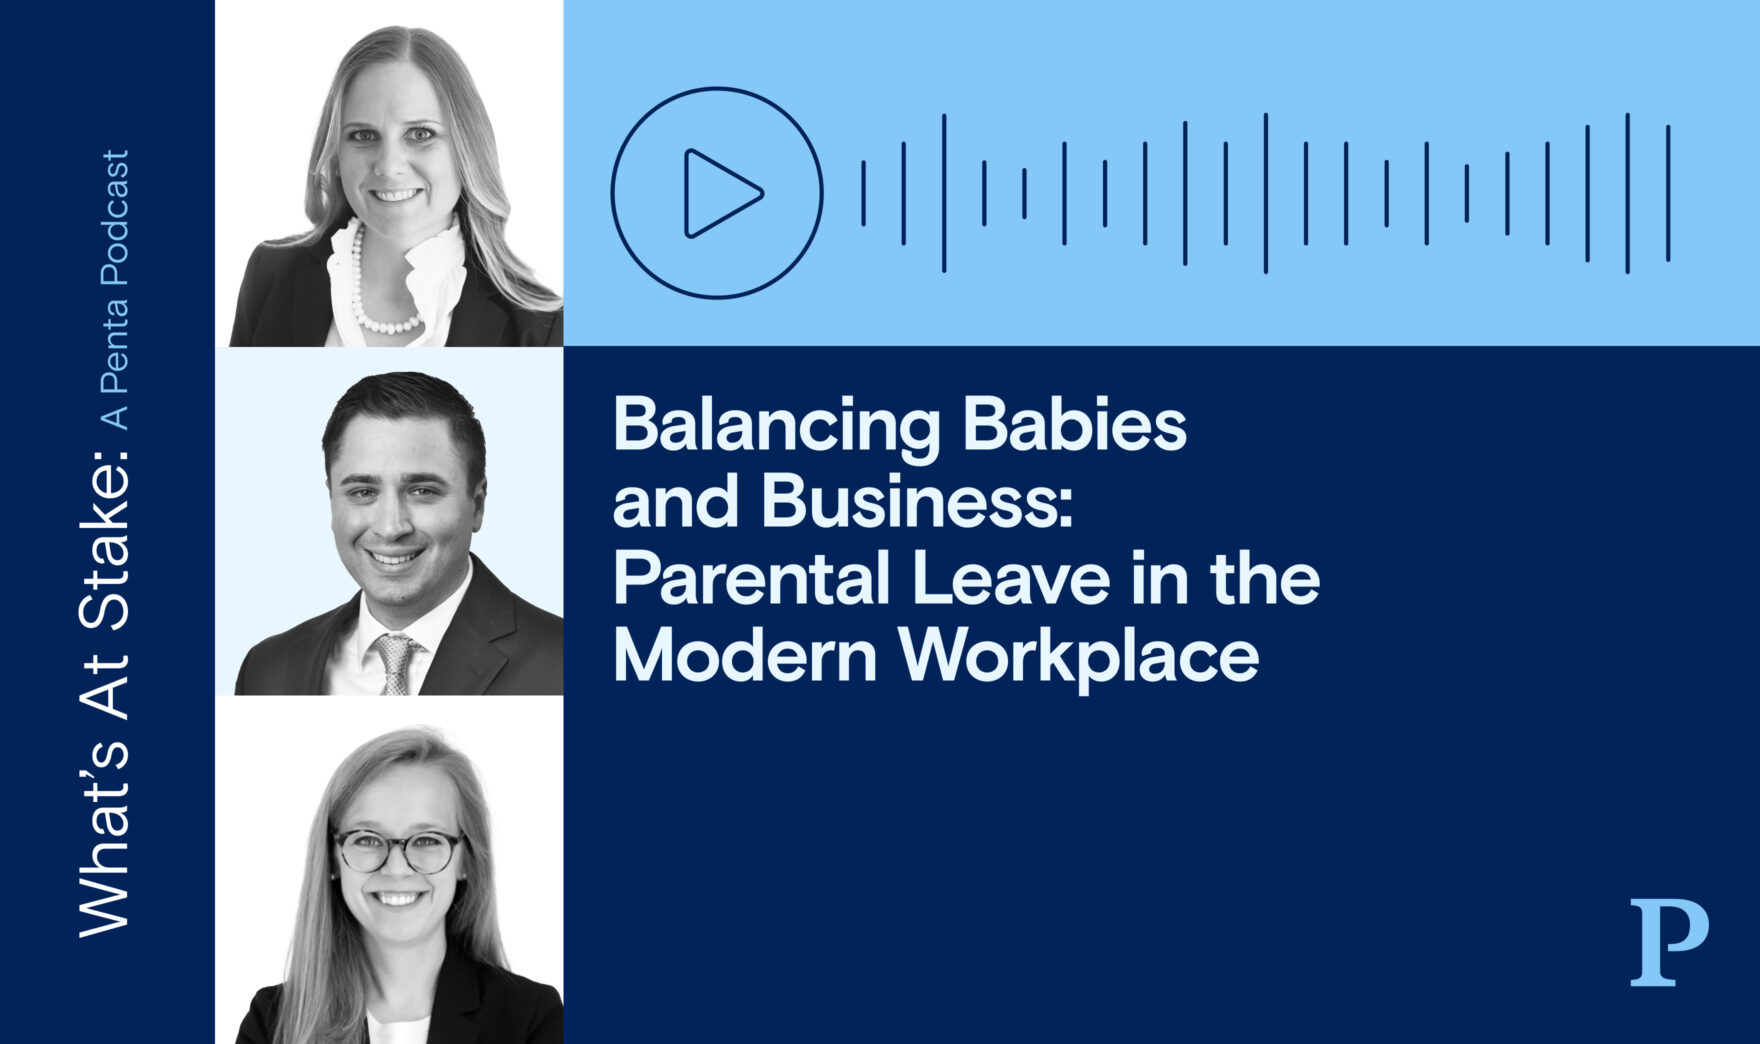 Balancing Babies and Business: Parental Leave in the Modern Workplace